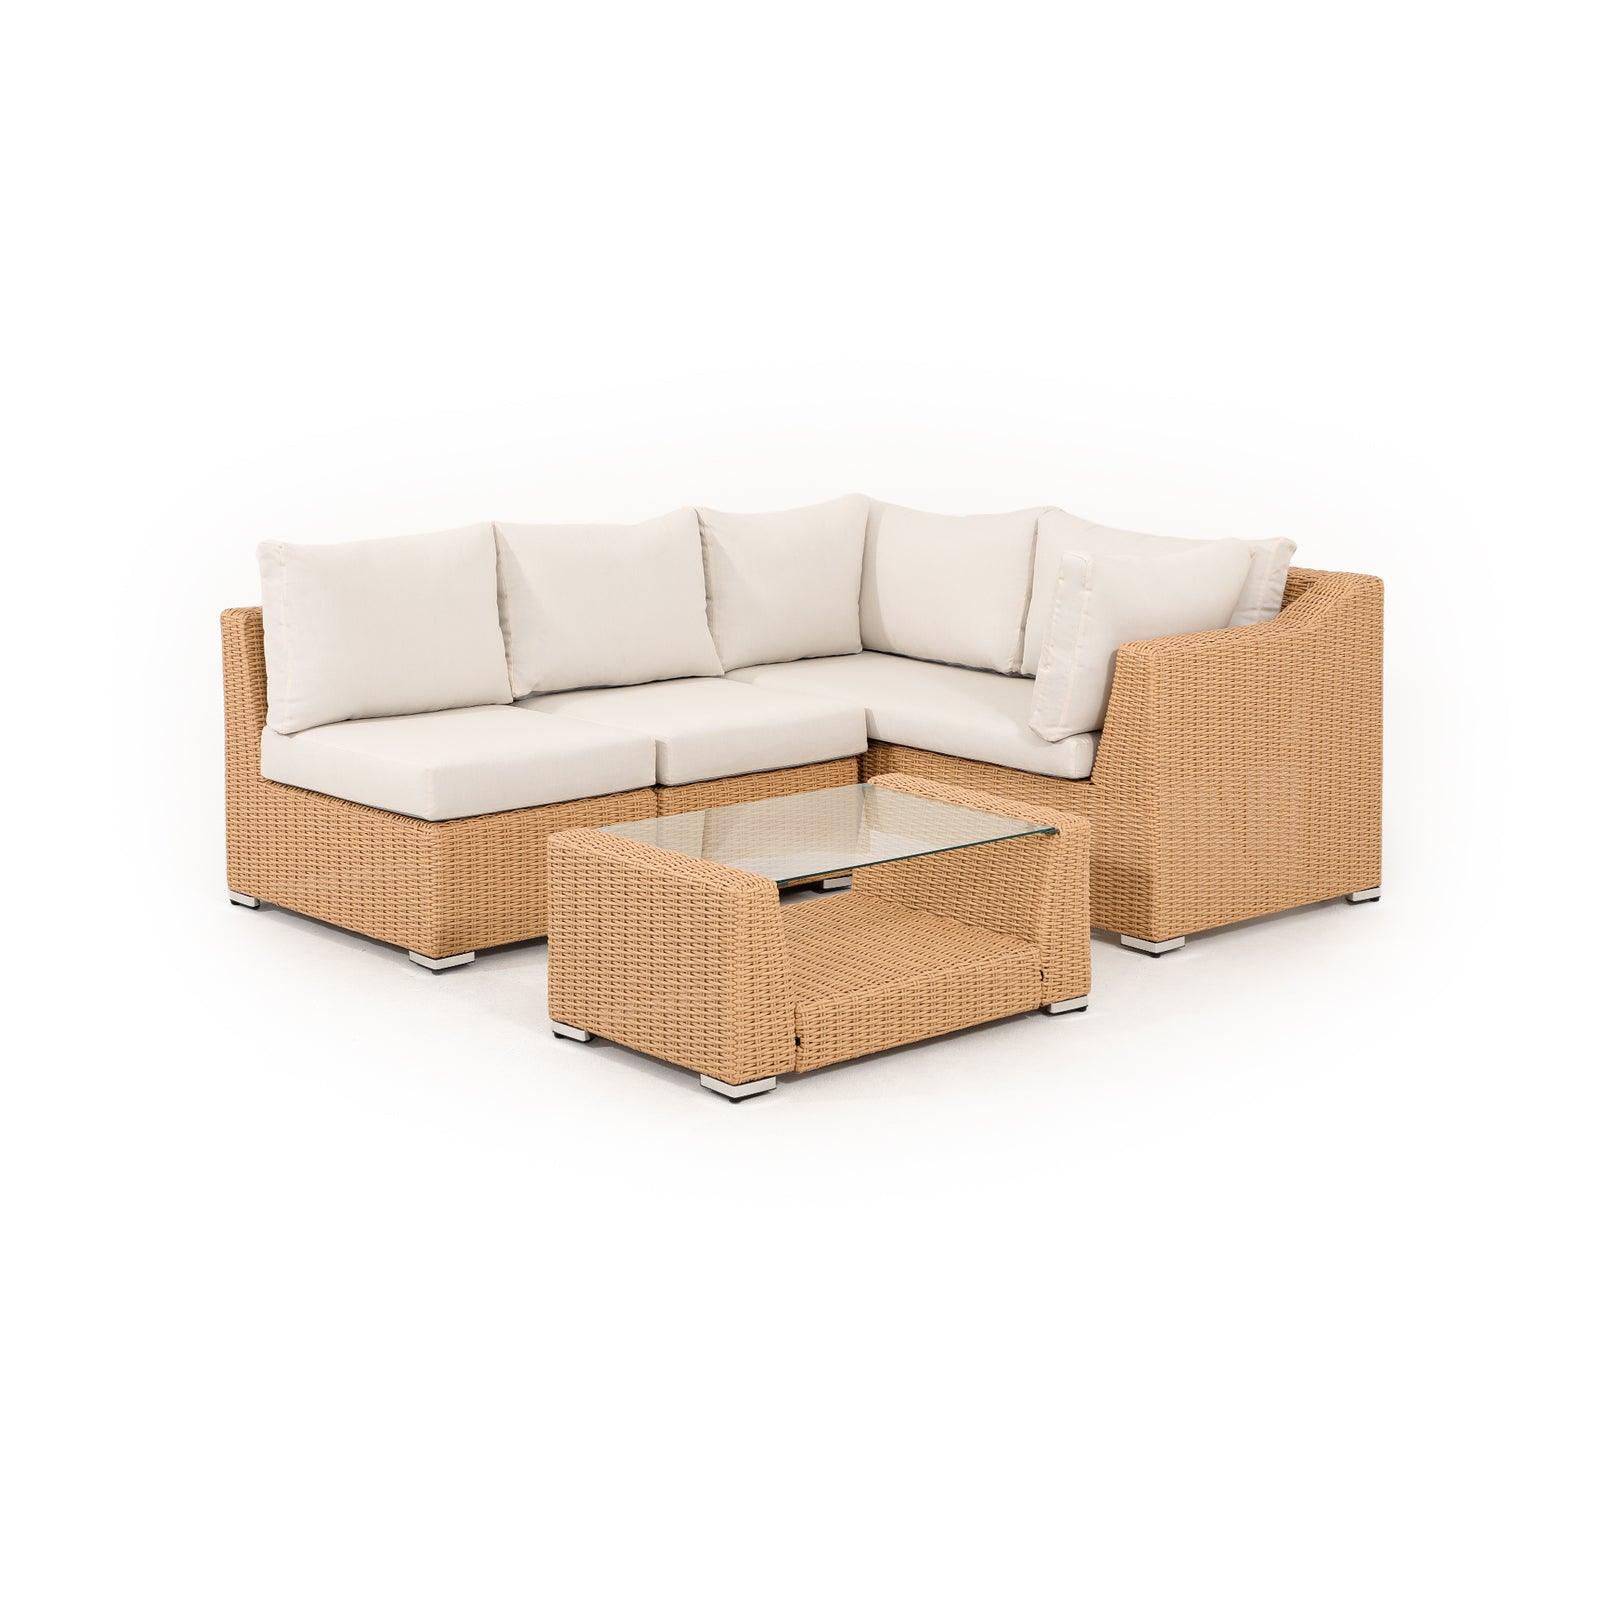 Elba Modern Wicker Outdoor Furniture, natural color Rattan Outdoor Sectional Sofa Set with beige cushions, 1 two-seater sofa, 2 single armless sofas, 1 rectangular coffee table with glass tabletop- Jardina Furniture